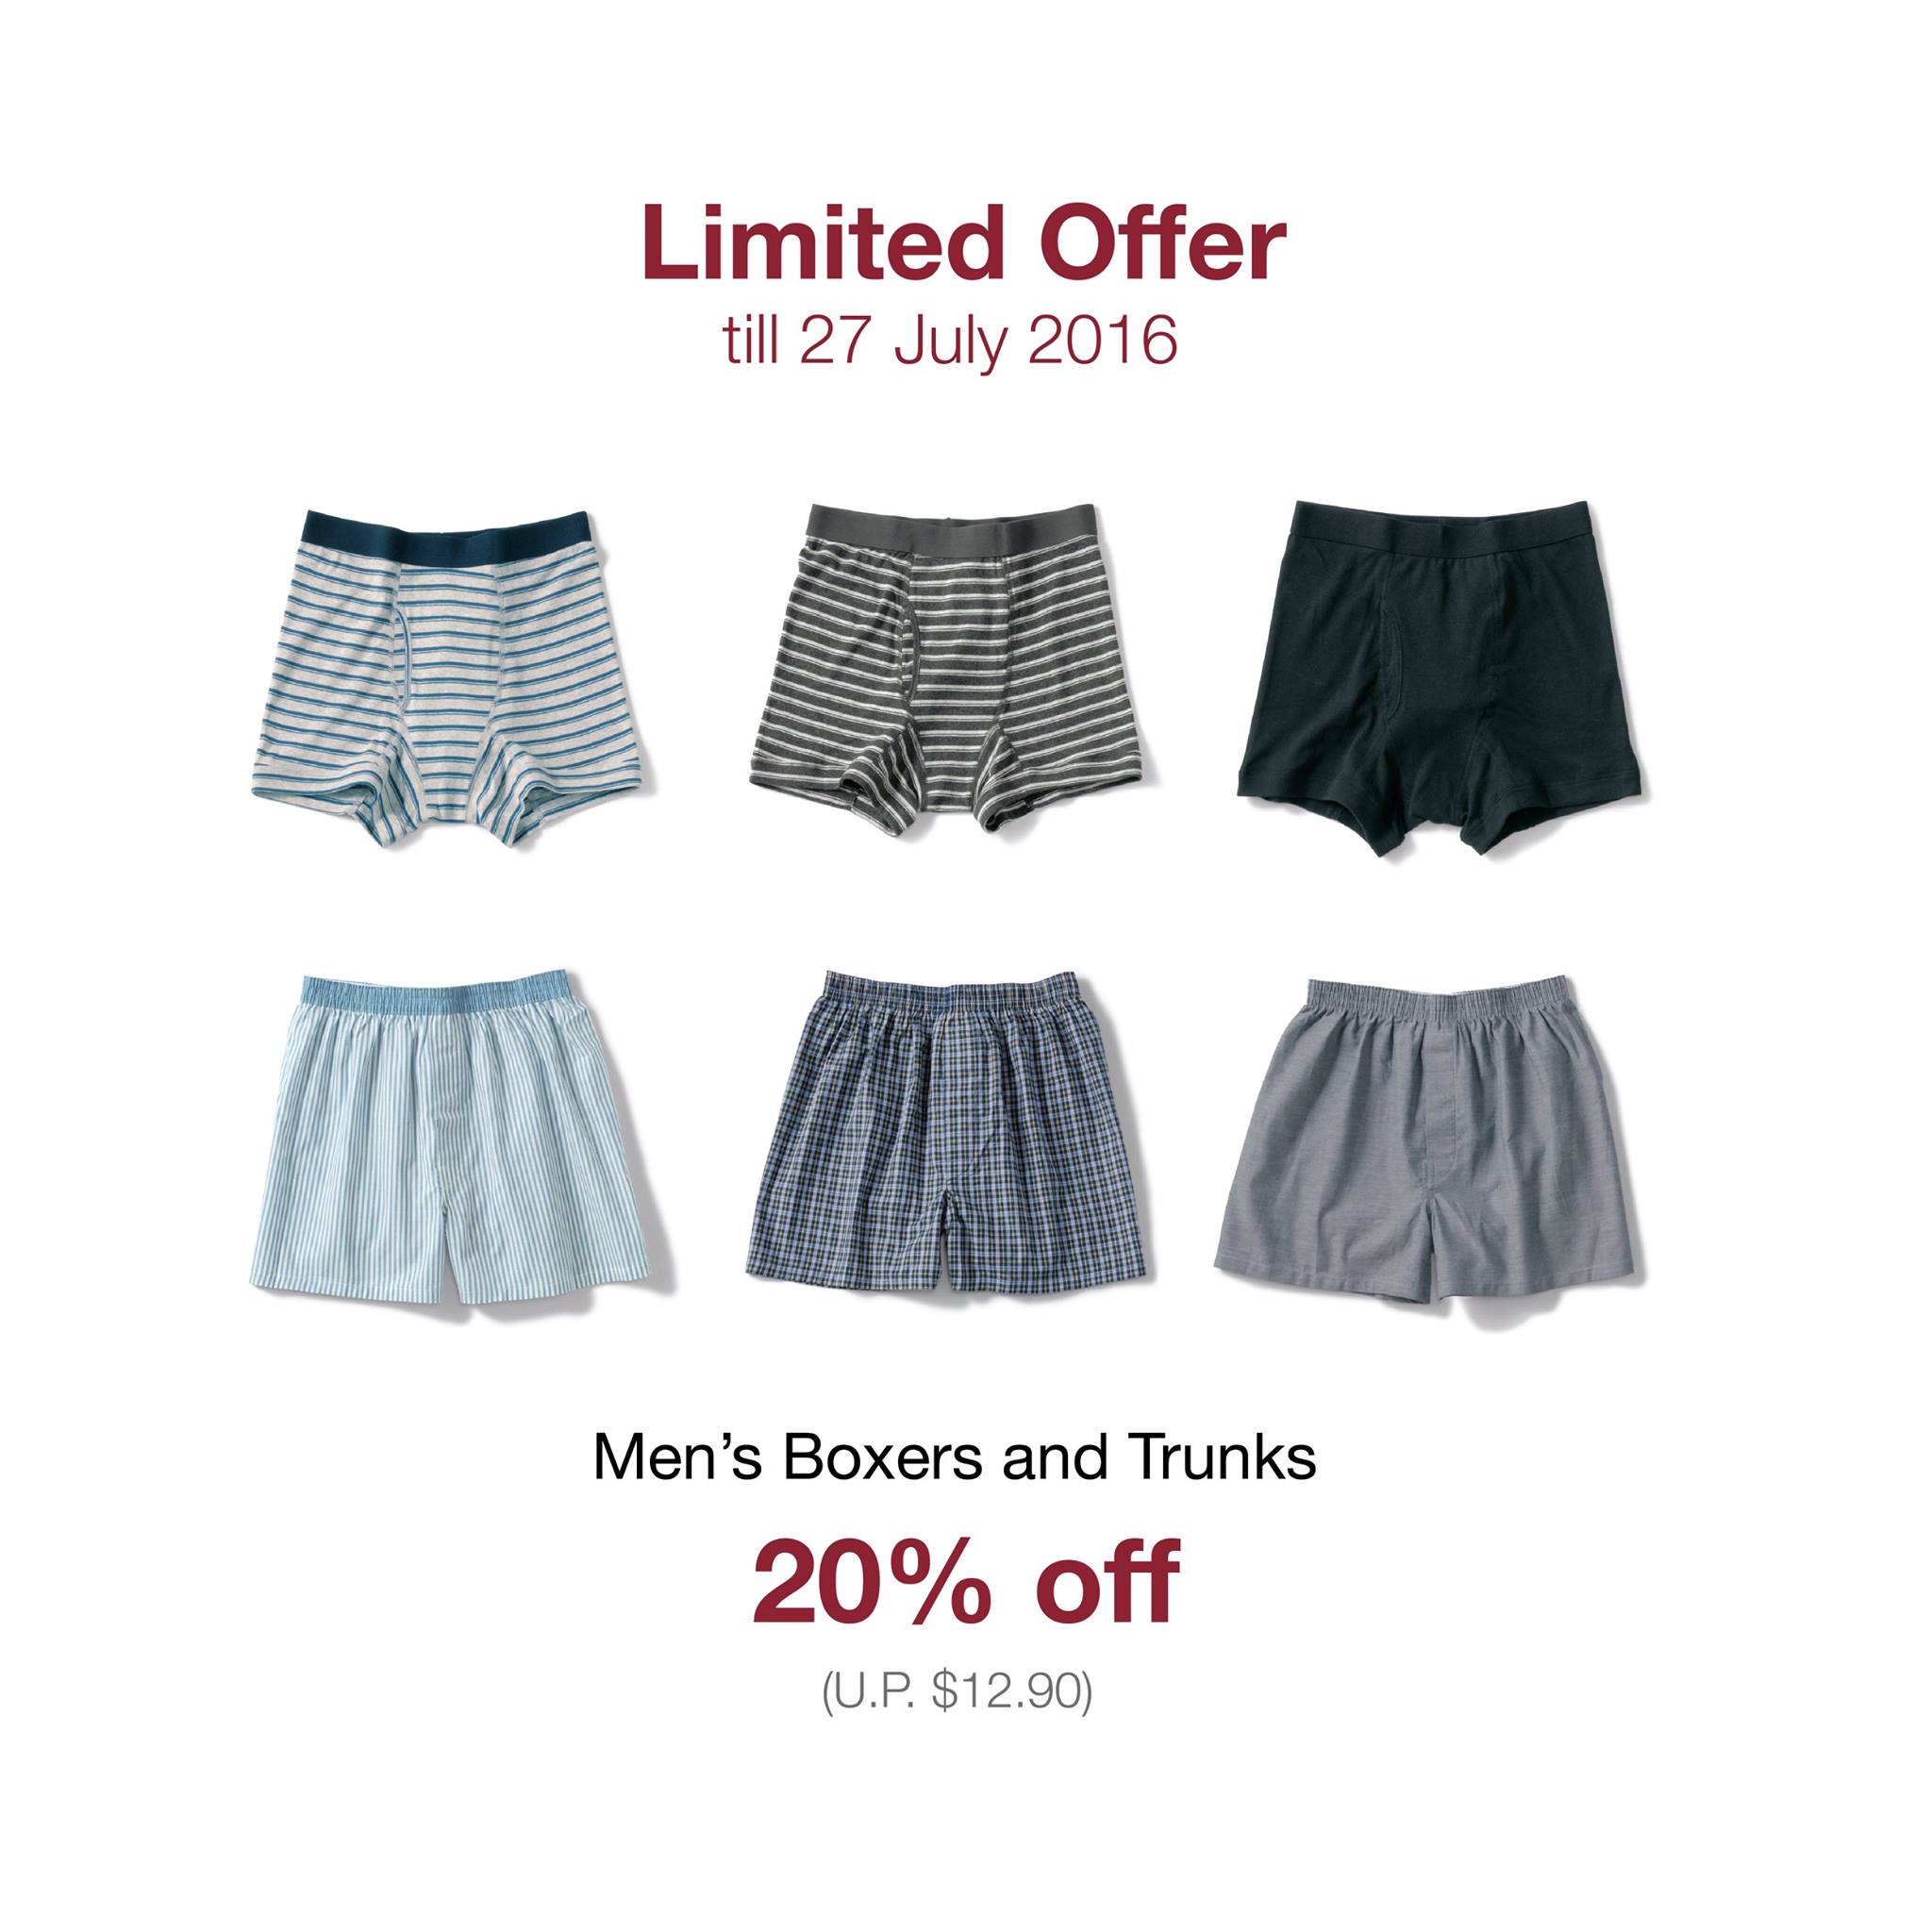 MUJI Boxers & Trunks Singapore Promotion ends 27 Jul 2016 | Why Not Deals